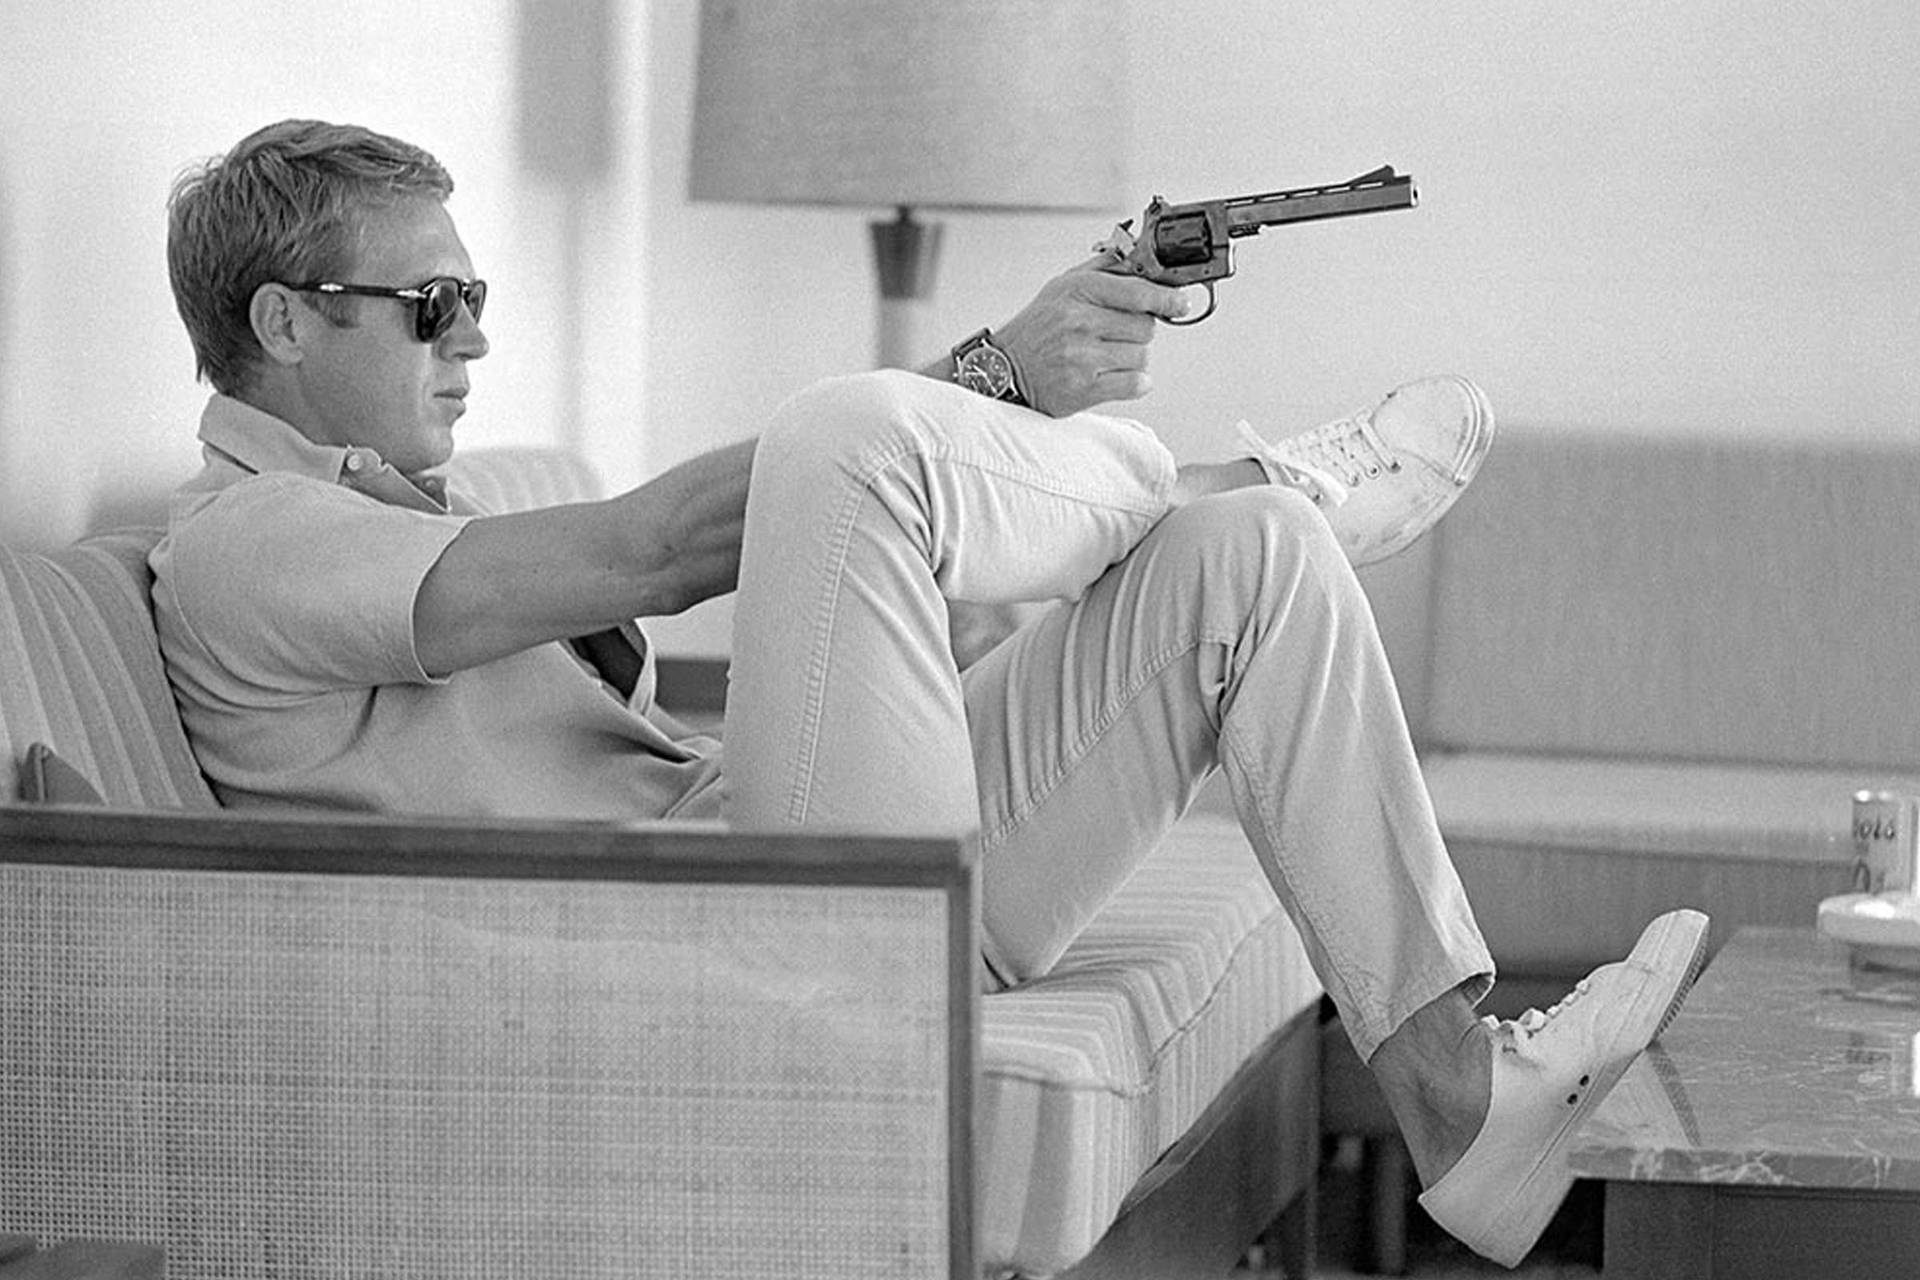 Finamerikansk Skådespelare Steve Mcqueen 1963 Porträtt (this Can Be Used As A Description For A Computer Or Mobile Wallpaper Featuring A Portrait Of Steve Mcqueen From 1963) Wallpaper